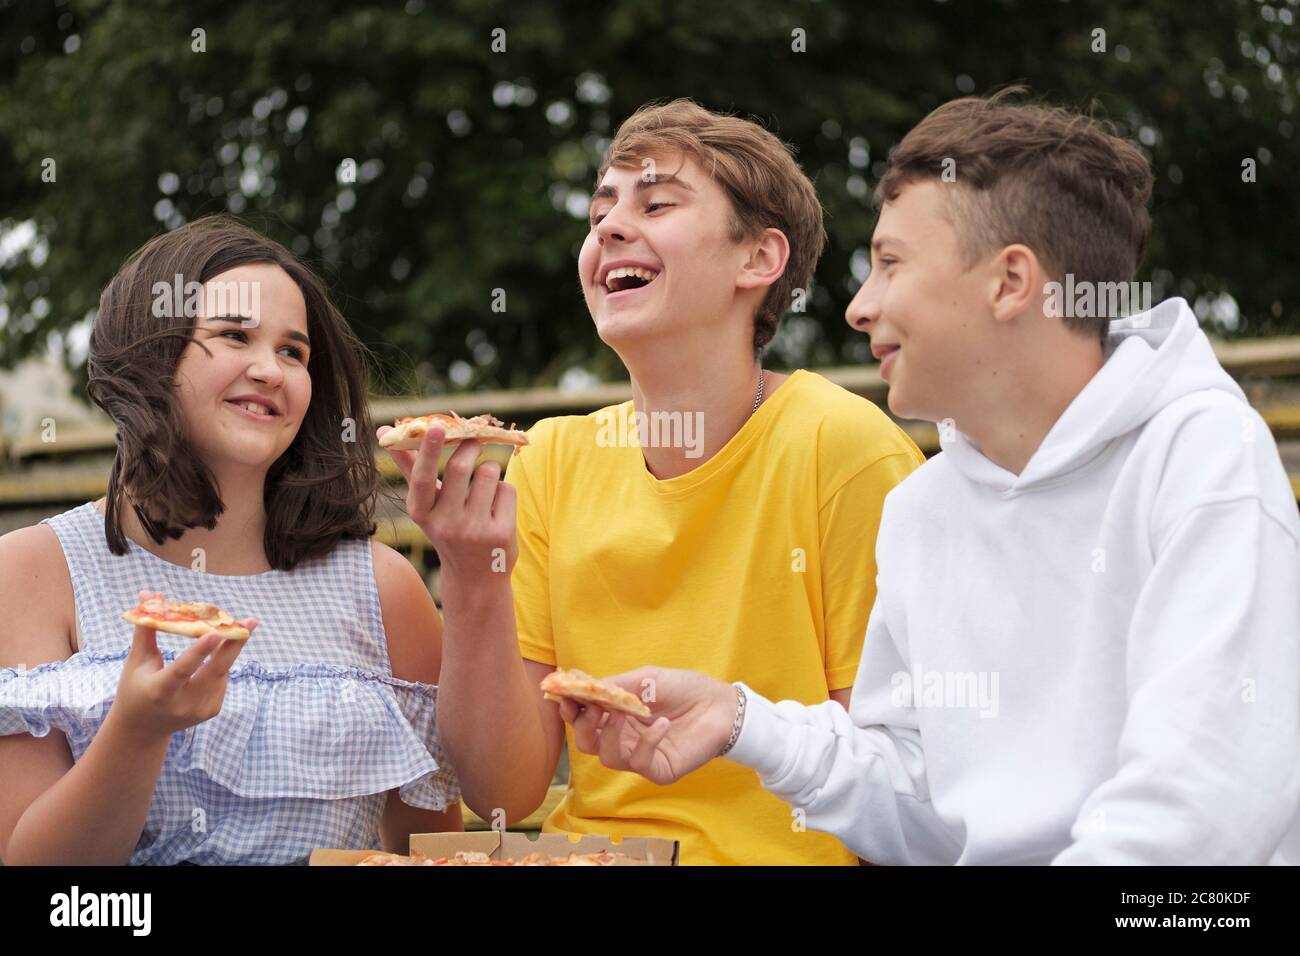 Two teenage boys and a girl sharing snacks outdoors laughing and joking together as they eat in a close up portrait Stock Photo